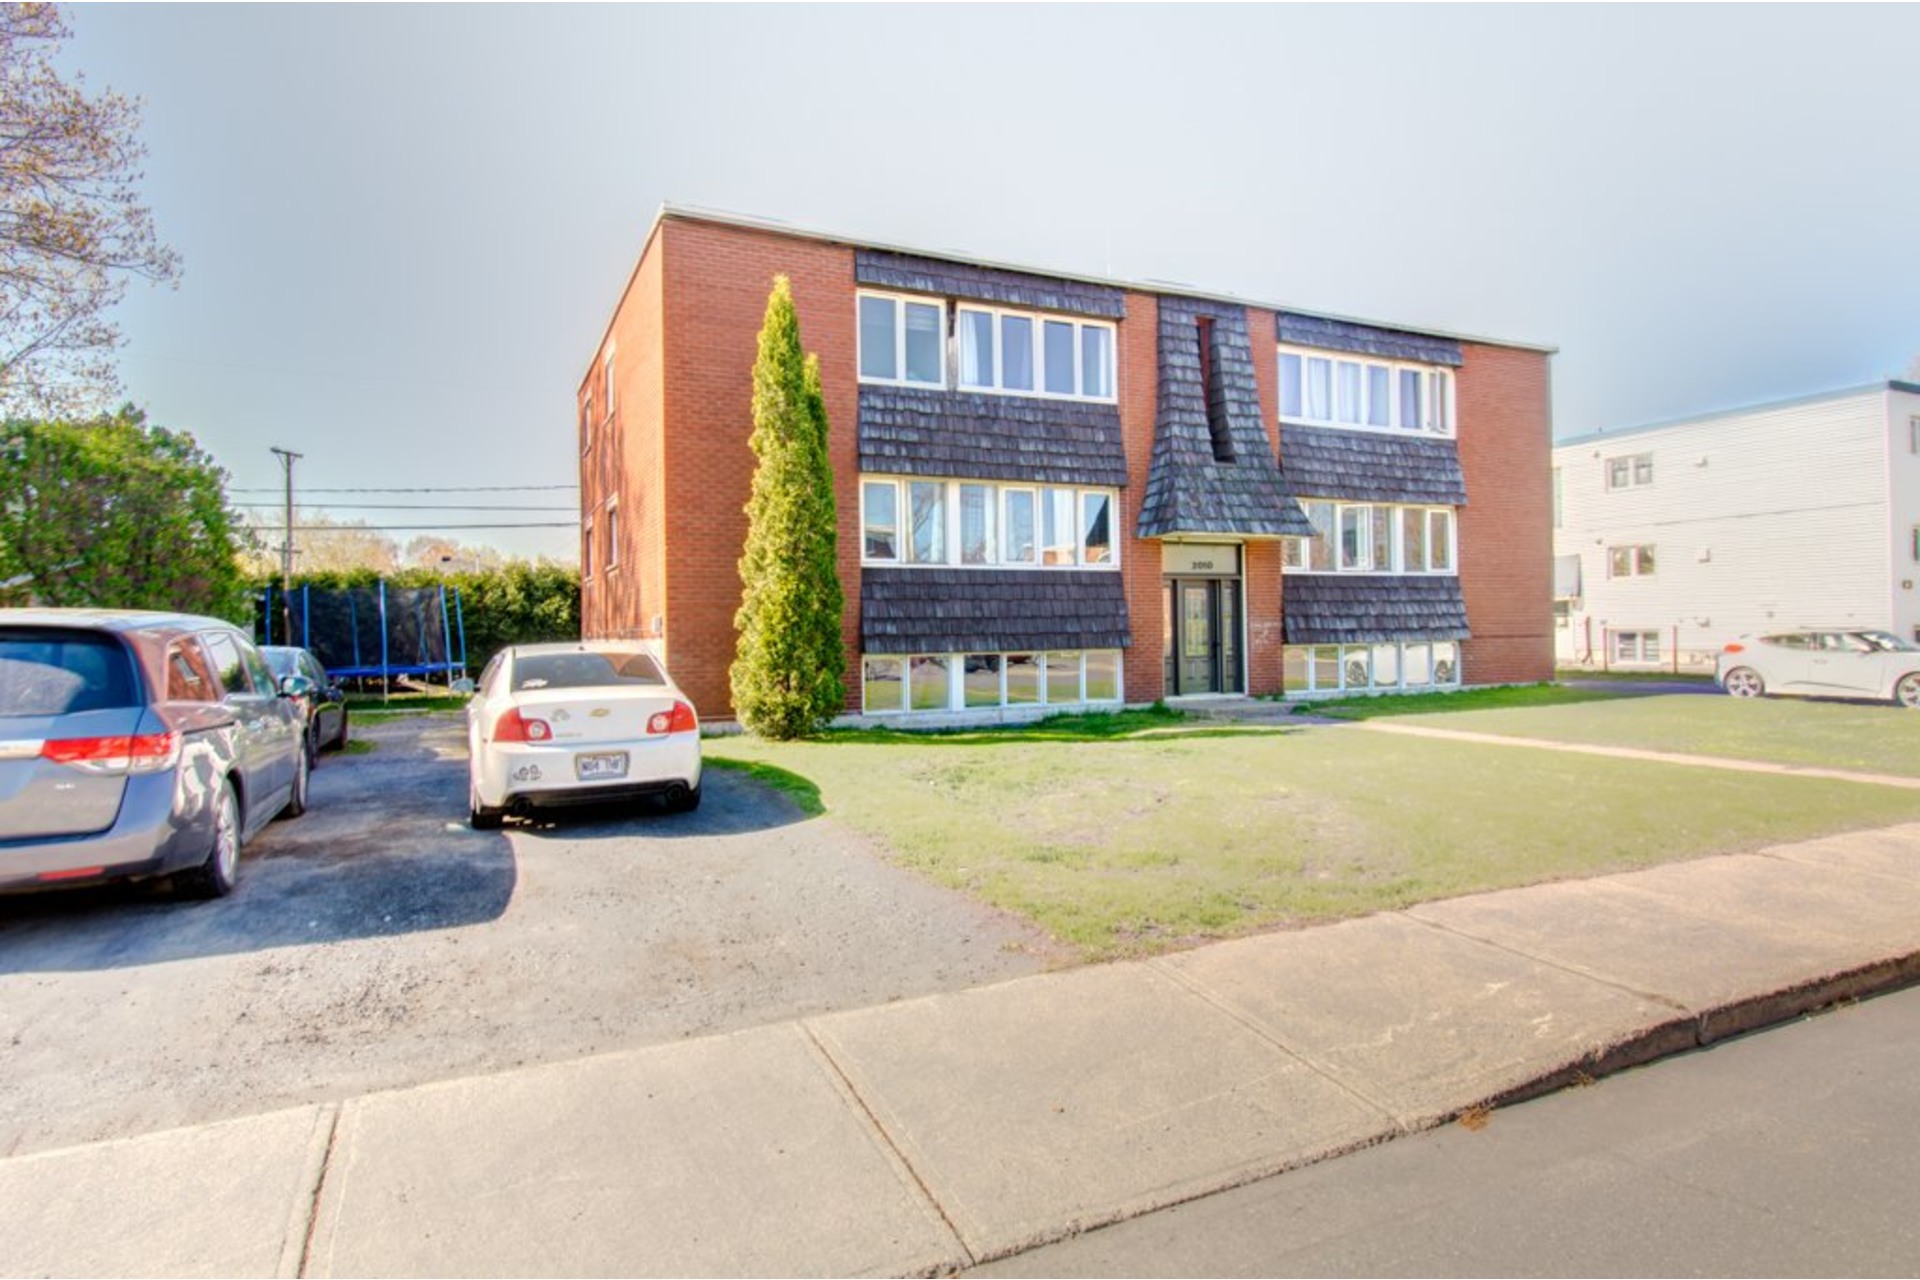 image 2 - Apartment For sale Sorel-Tracy - 5 rooms